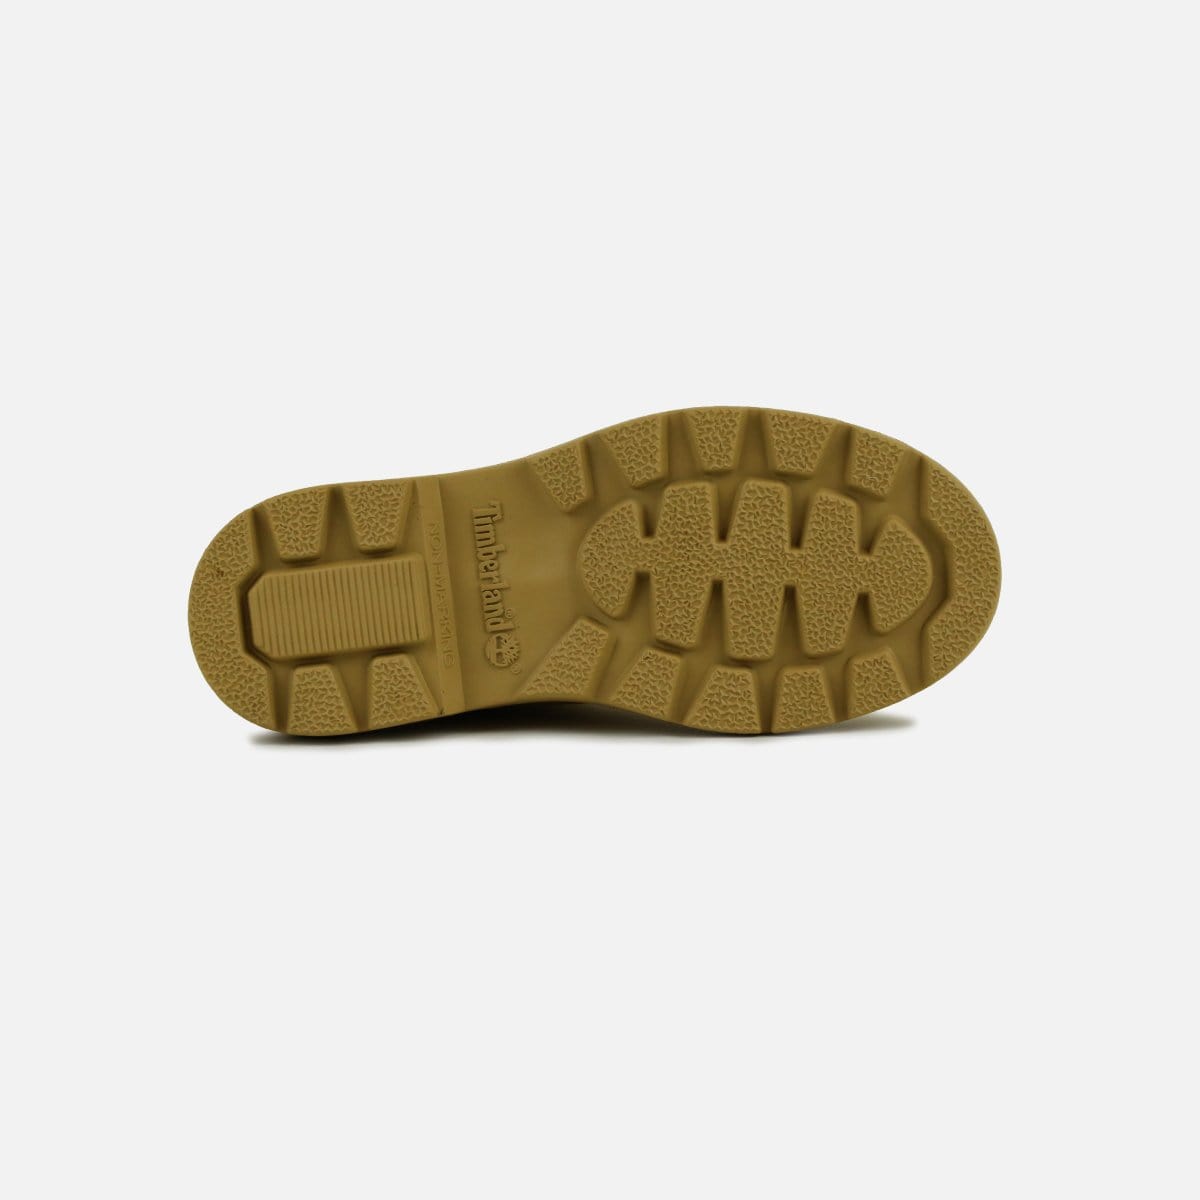 RUVilla.com is where to buy the Timberland Classic 6" Pre-School Boot (Wheat)!